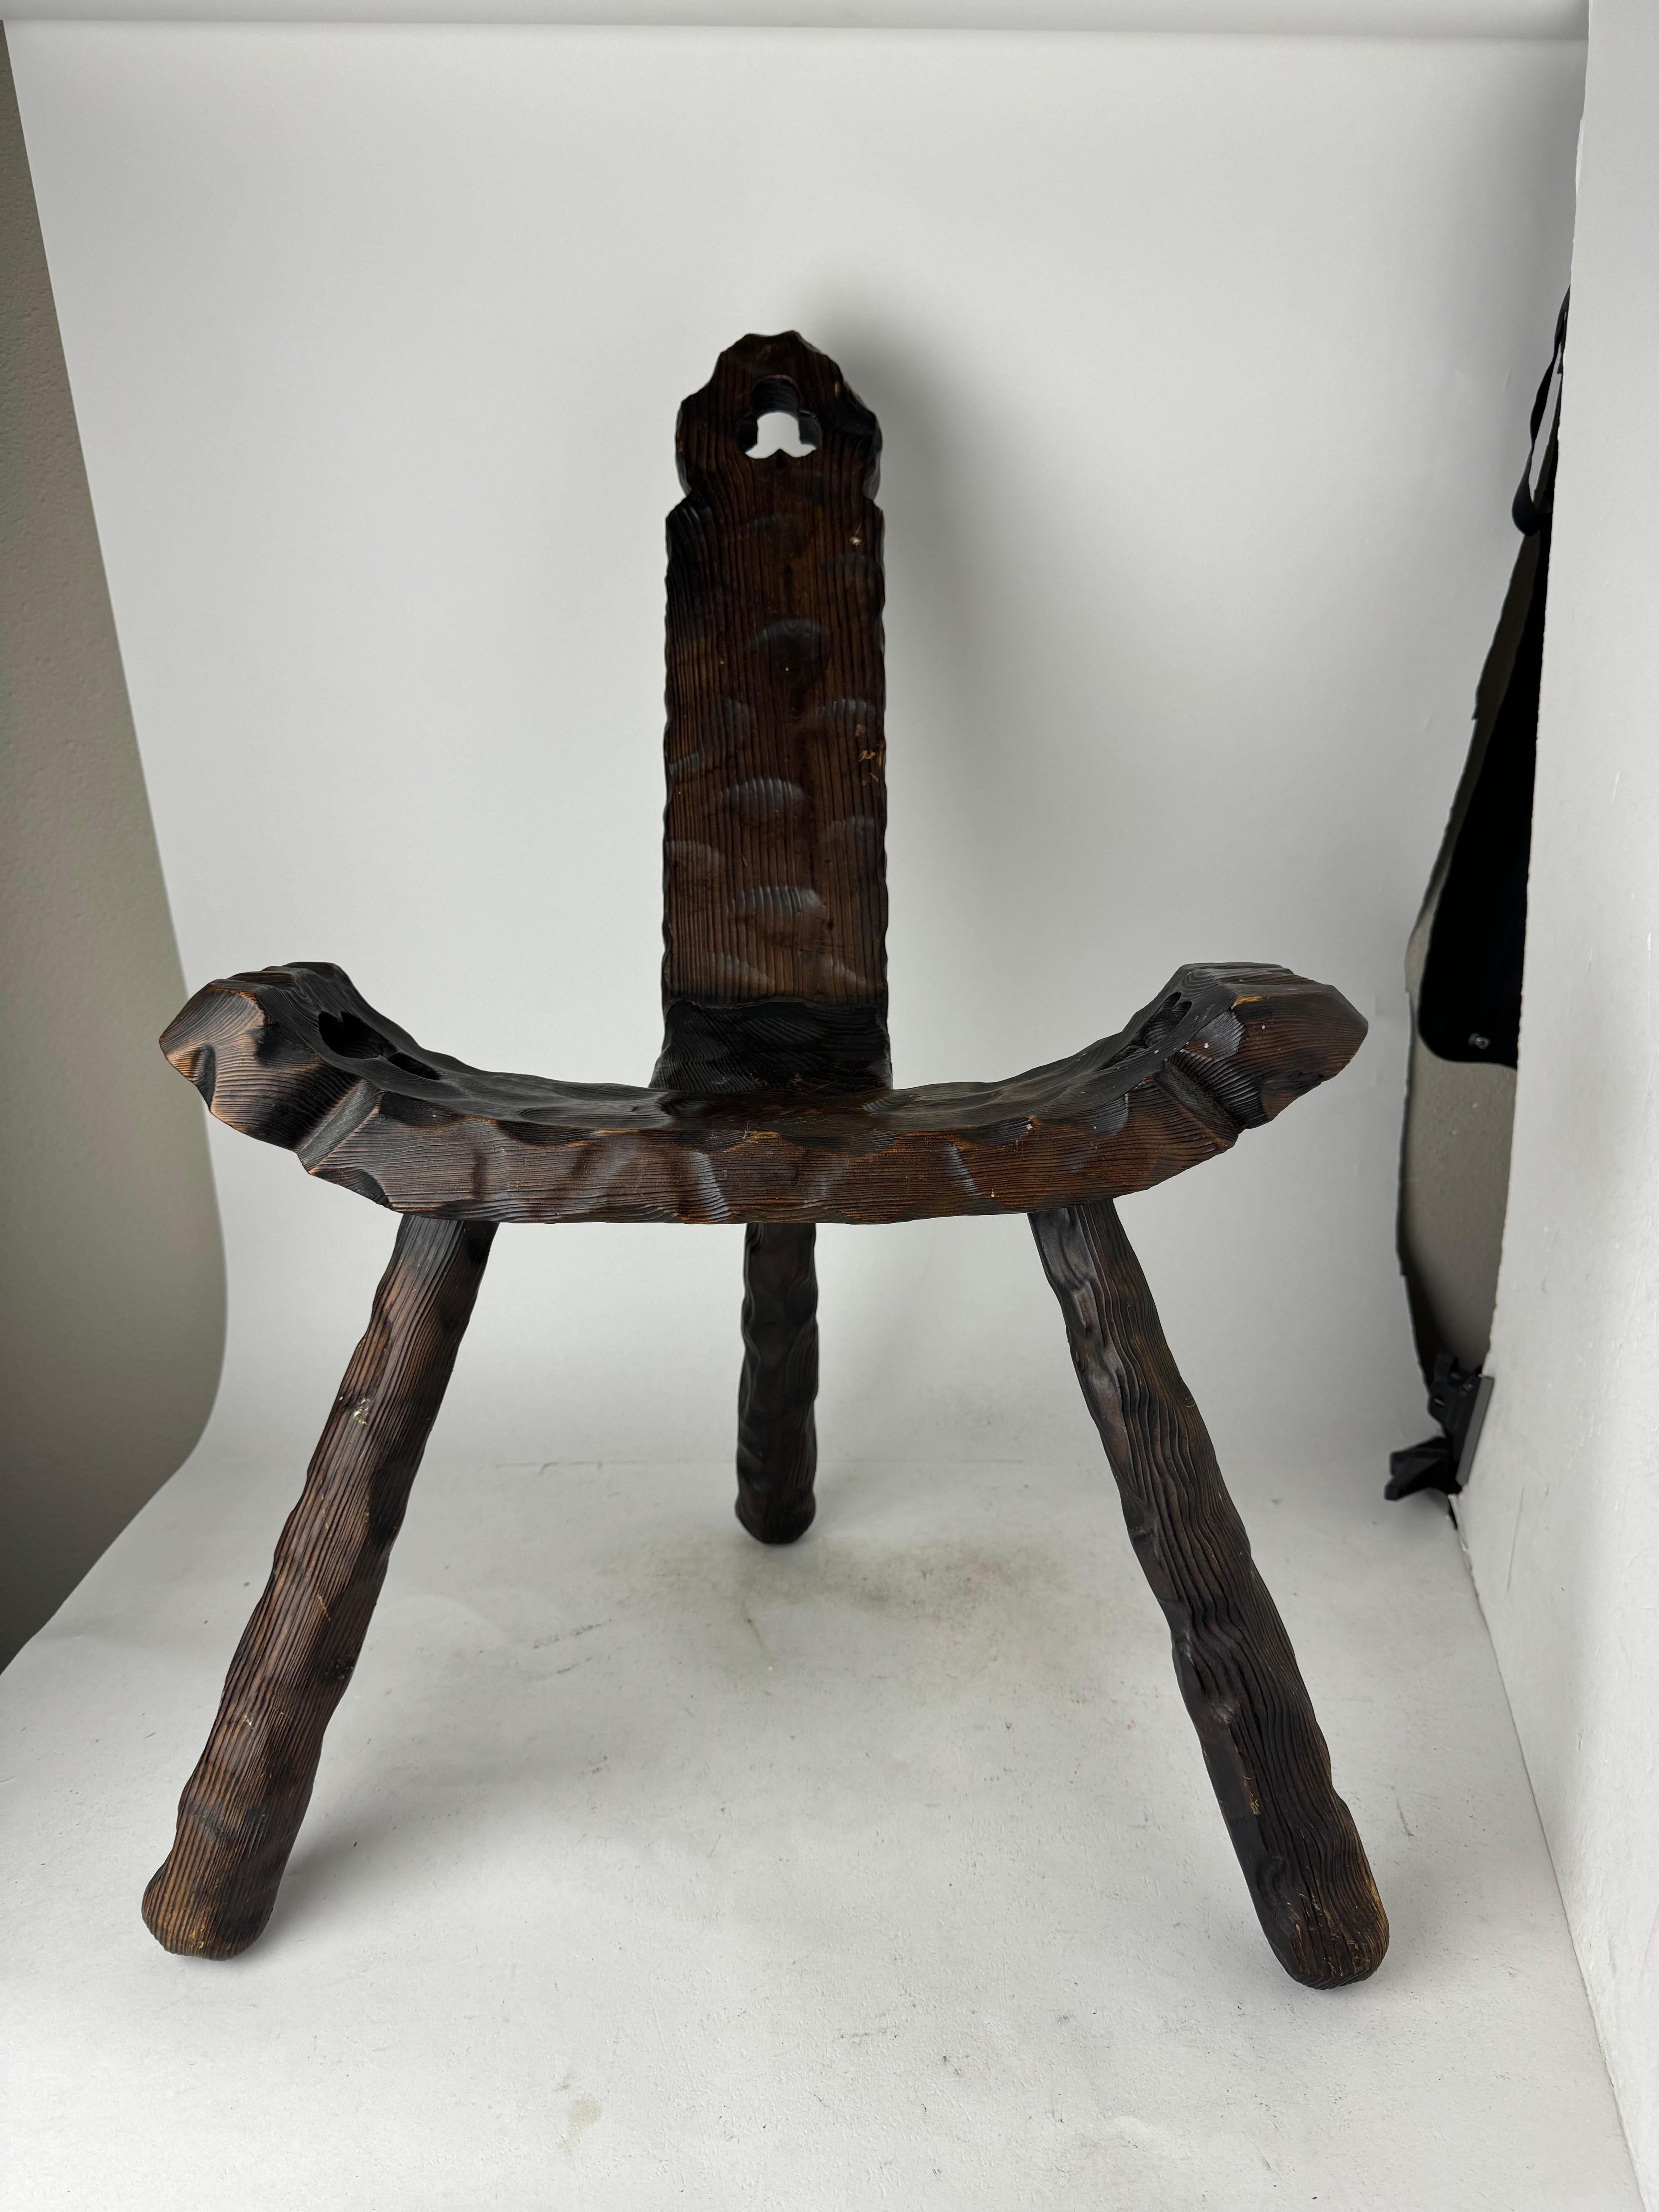 🌟 Vintage Spanish Hand-Carved 3-Legged Stool with High Backrest! 🌟

Step back in time with this exquisite piece of mid-20th-century craftsmanship! Presenting a gorgeous 3-legged or tripod stool all the way from Spain, meticulously hand-carved in